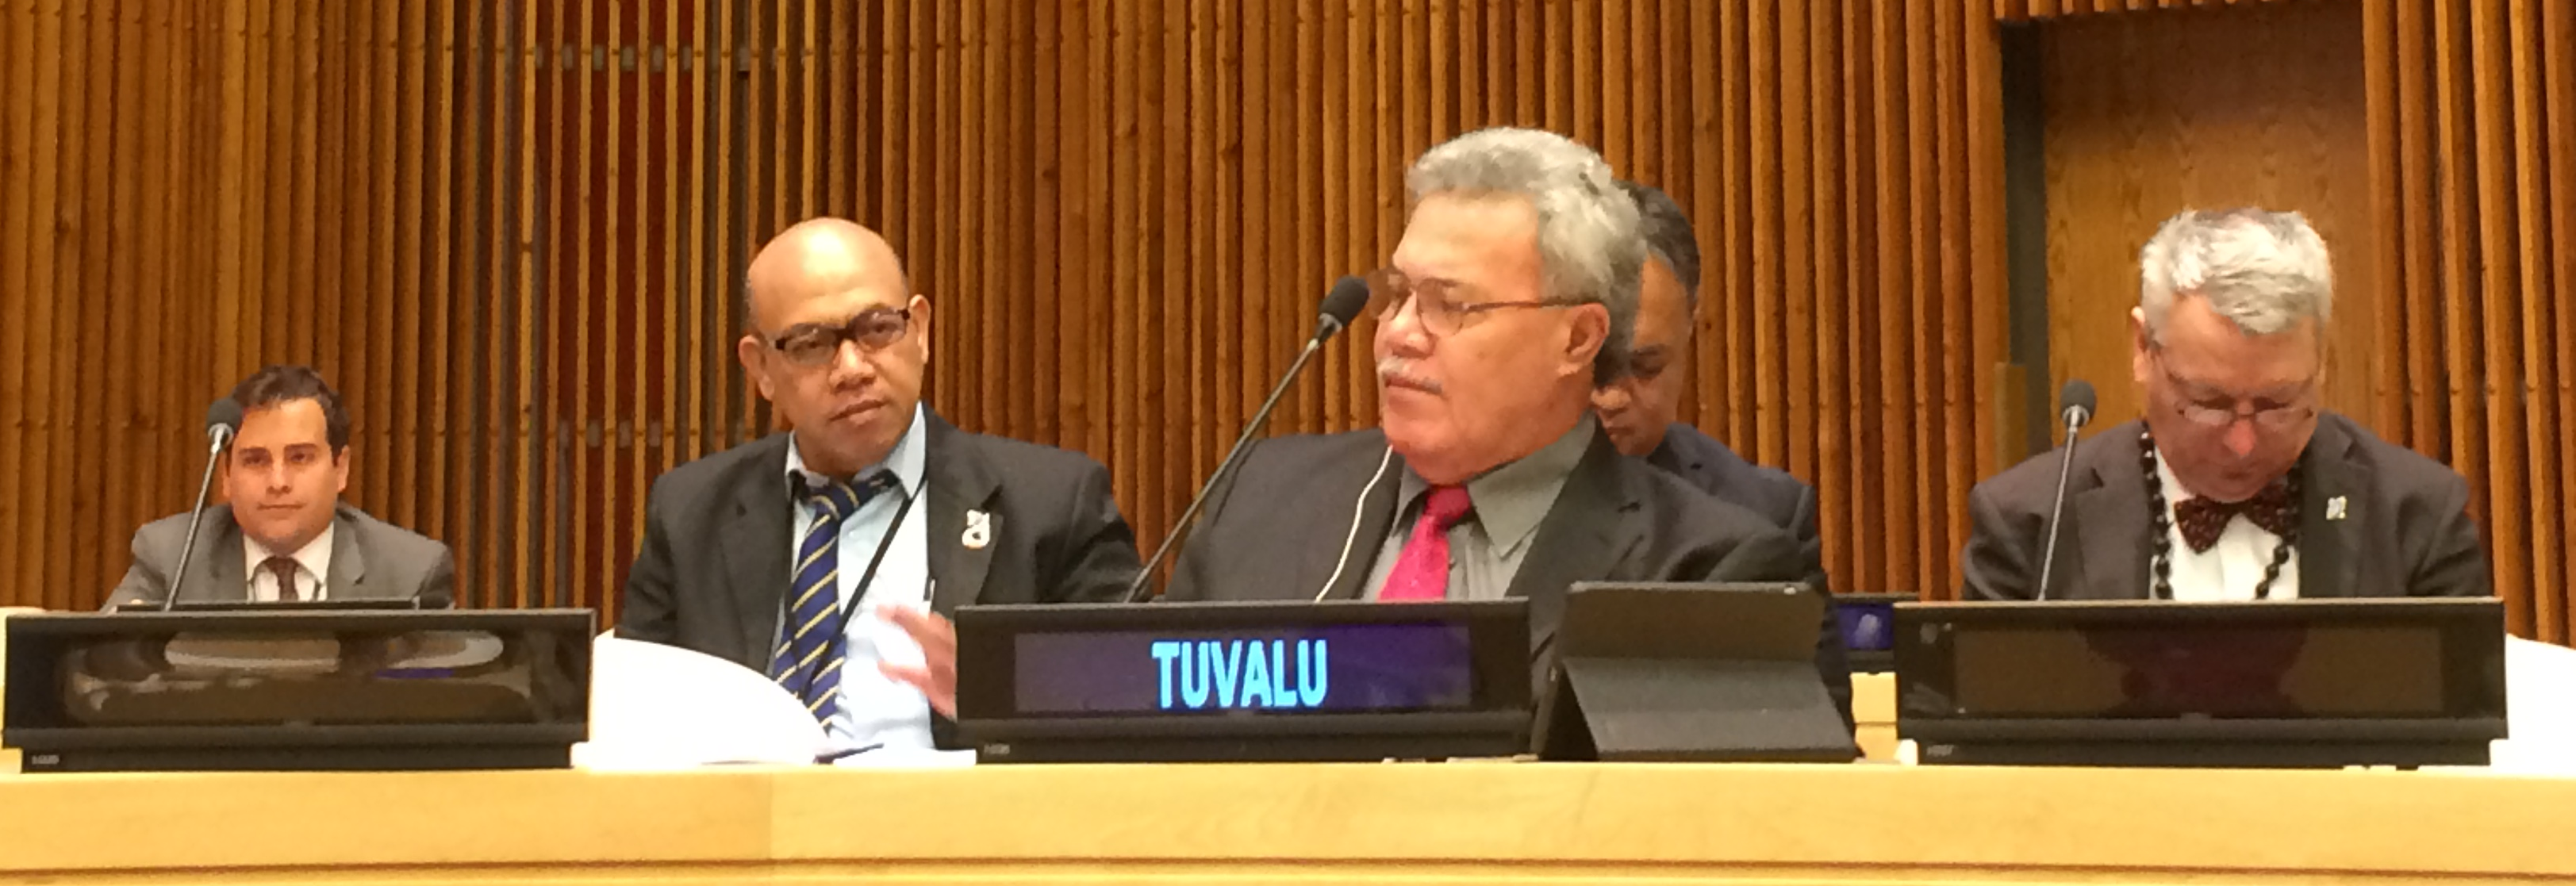 Tuvalu’s Prime Minister Appointed President of the SIDS DOCK Assembly